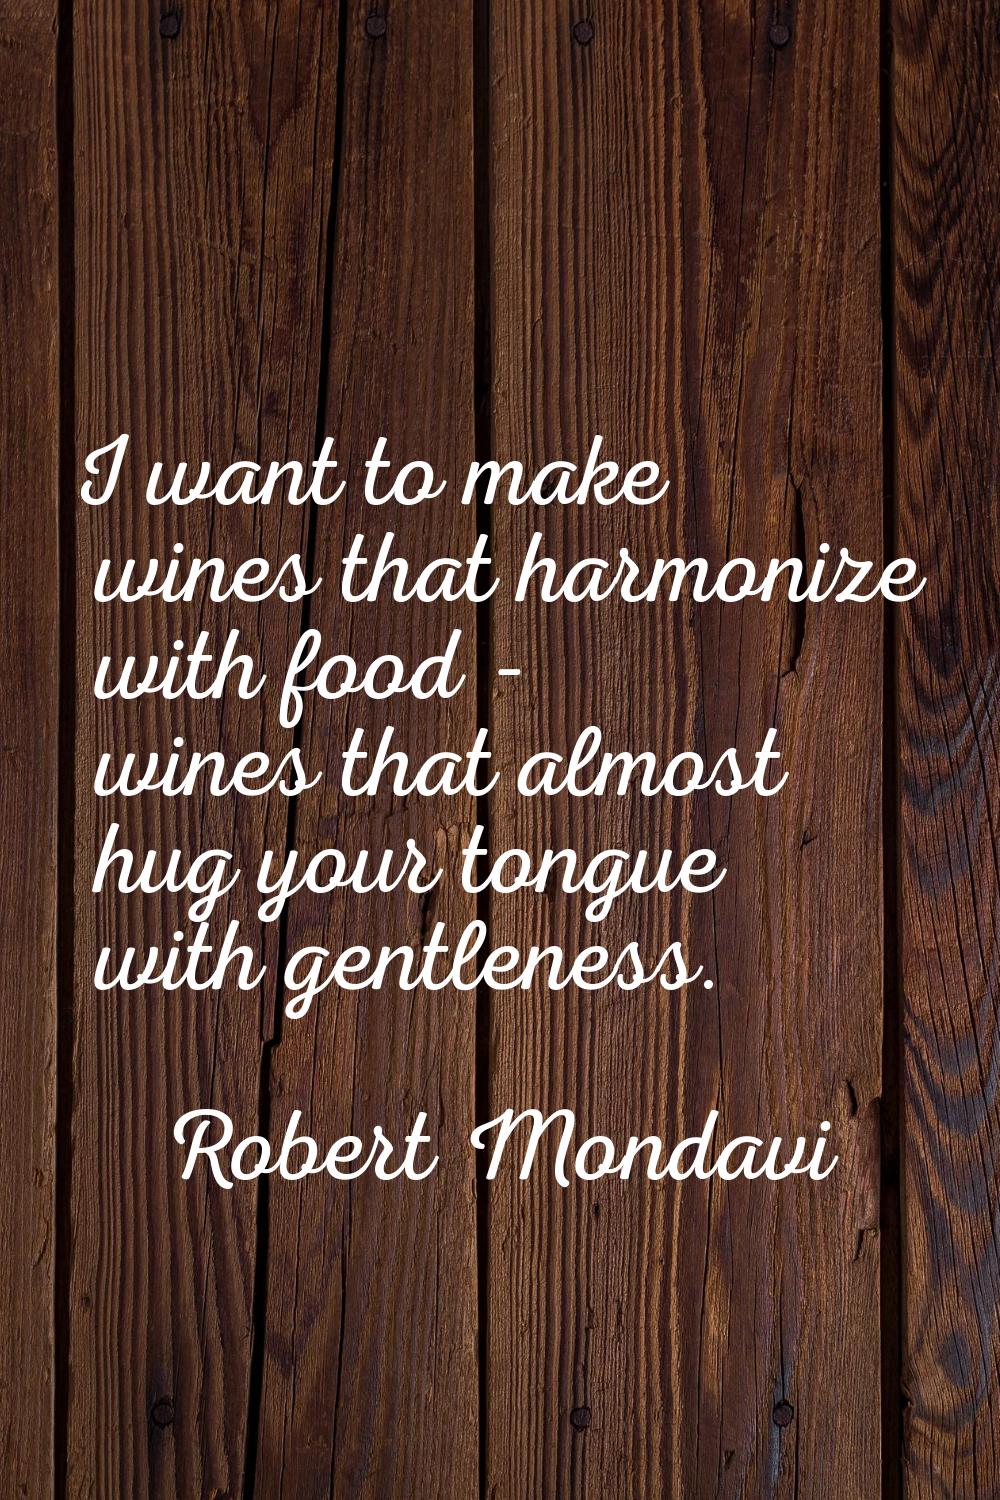 I want to make wines that harmonize with food - wines that almost hug your tongue with gentleness.